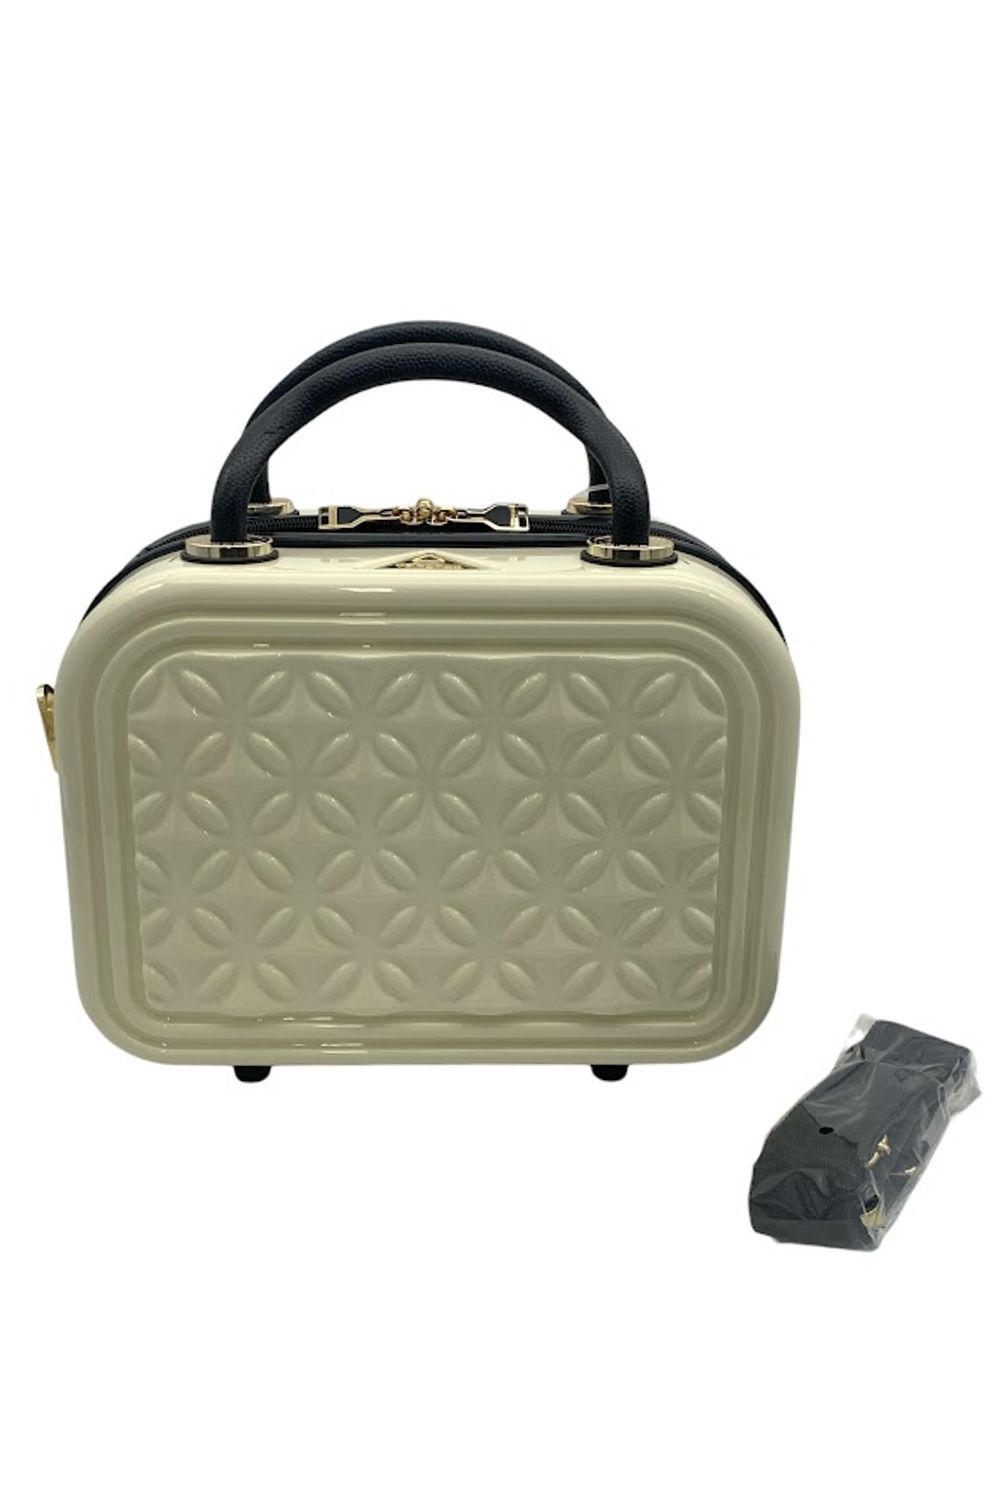 Buy the Triforce Hard Shell Travel Beauty Case